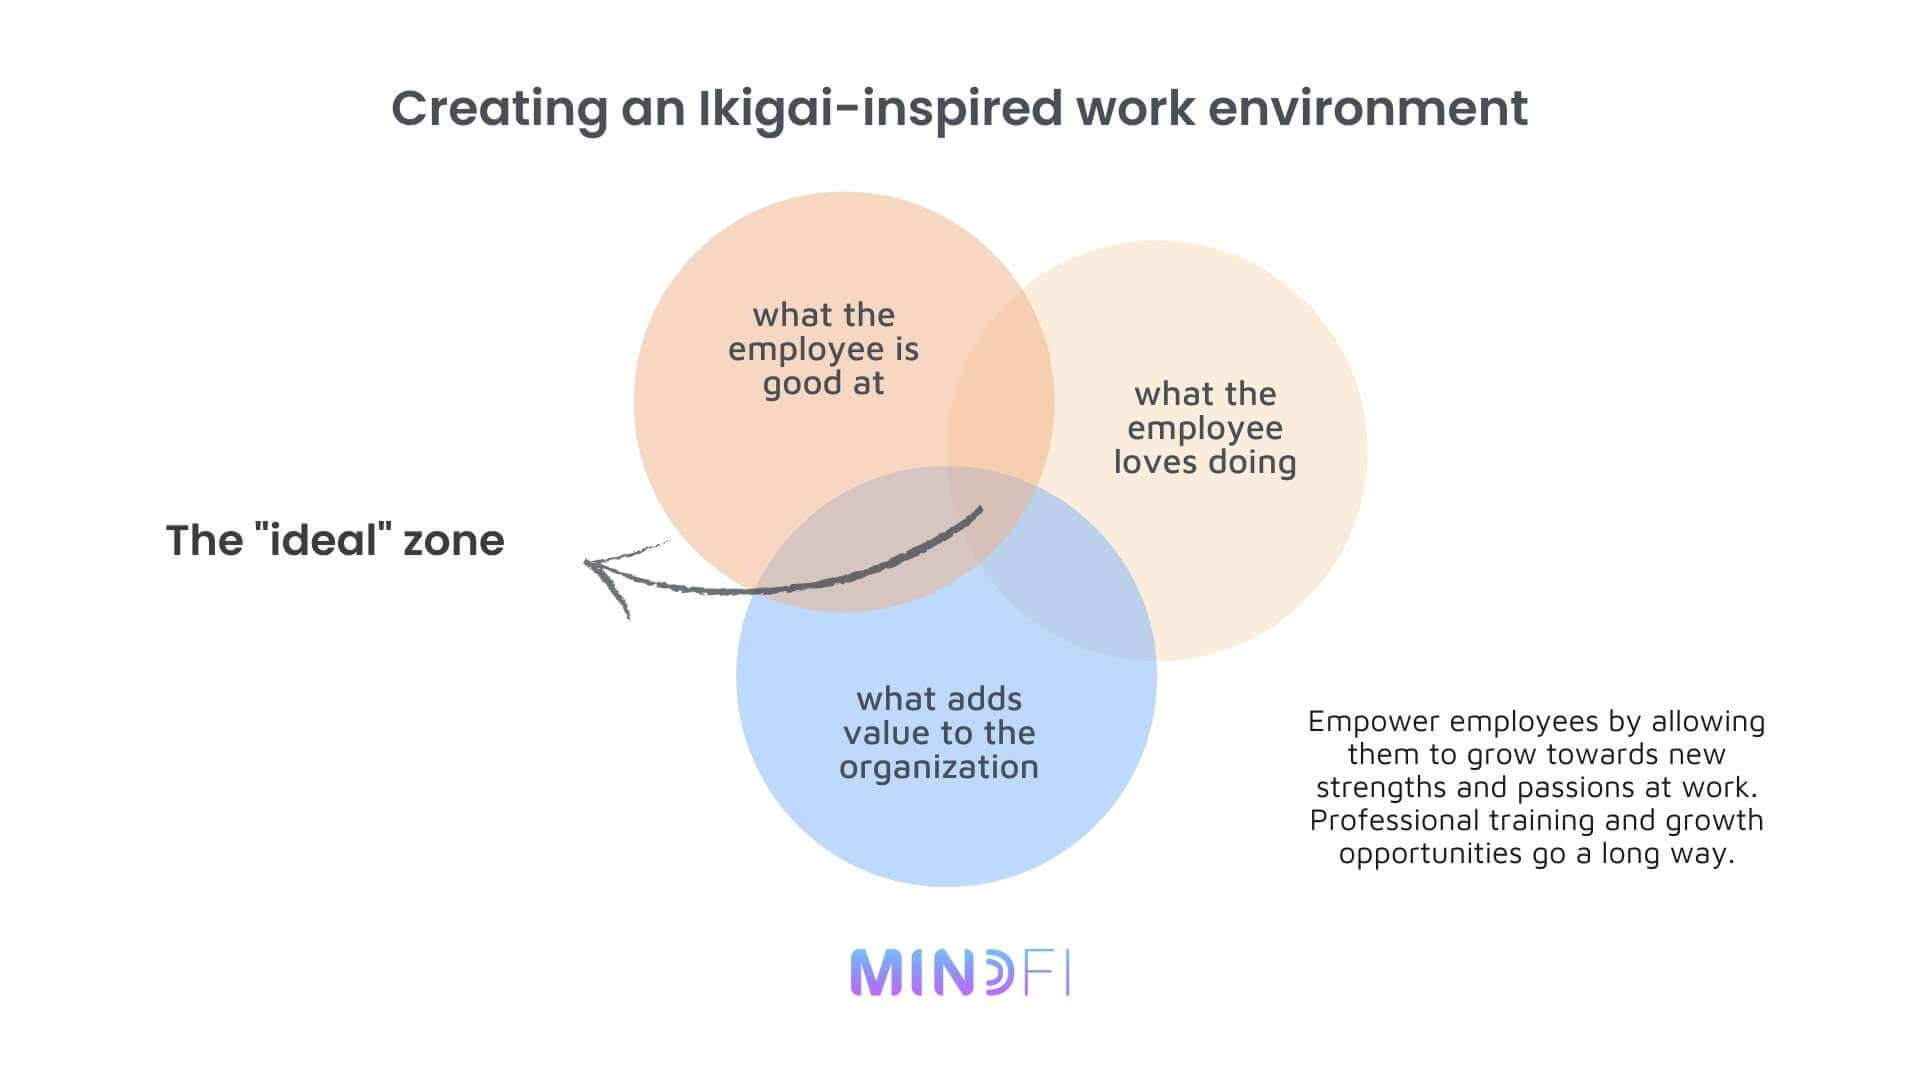 A venn diagram describing Ikigai 101 for the work environment. The sweet spot of ikigai is the culmination of what the employee is good at, what the employee loves doing, and what adds value to the organization.